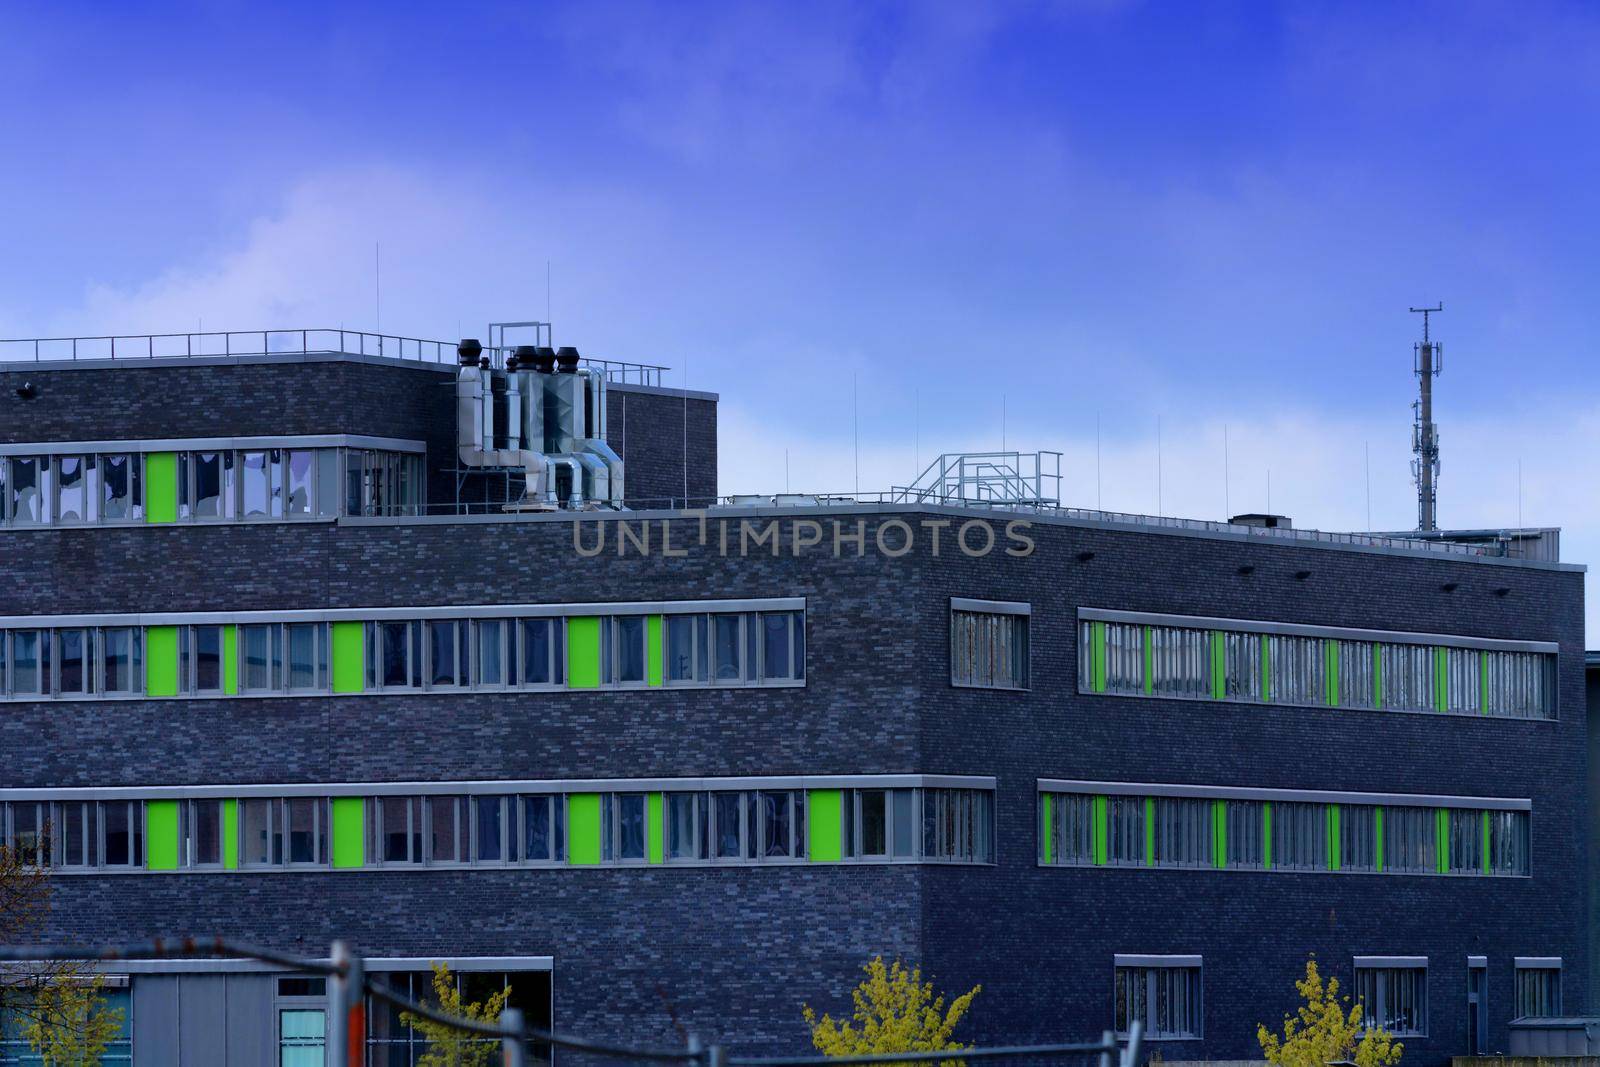 Modern campus of the cities Velbert and Heiligenhaus         by JFsPic